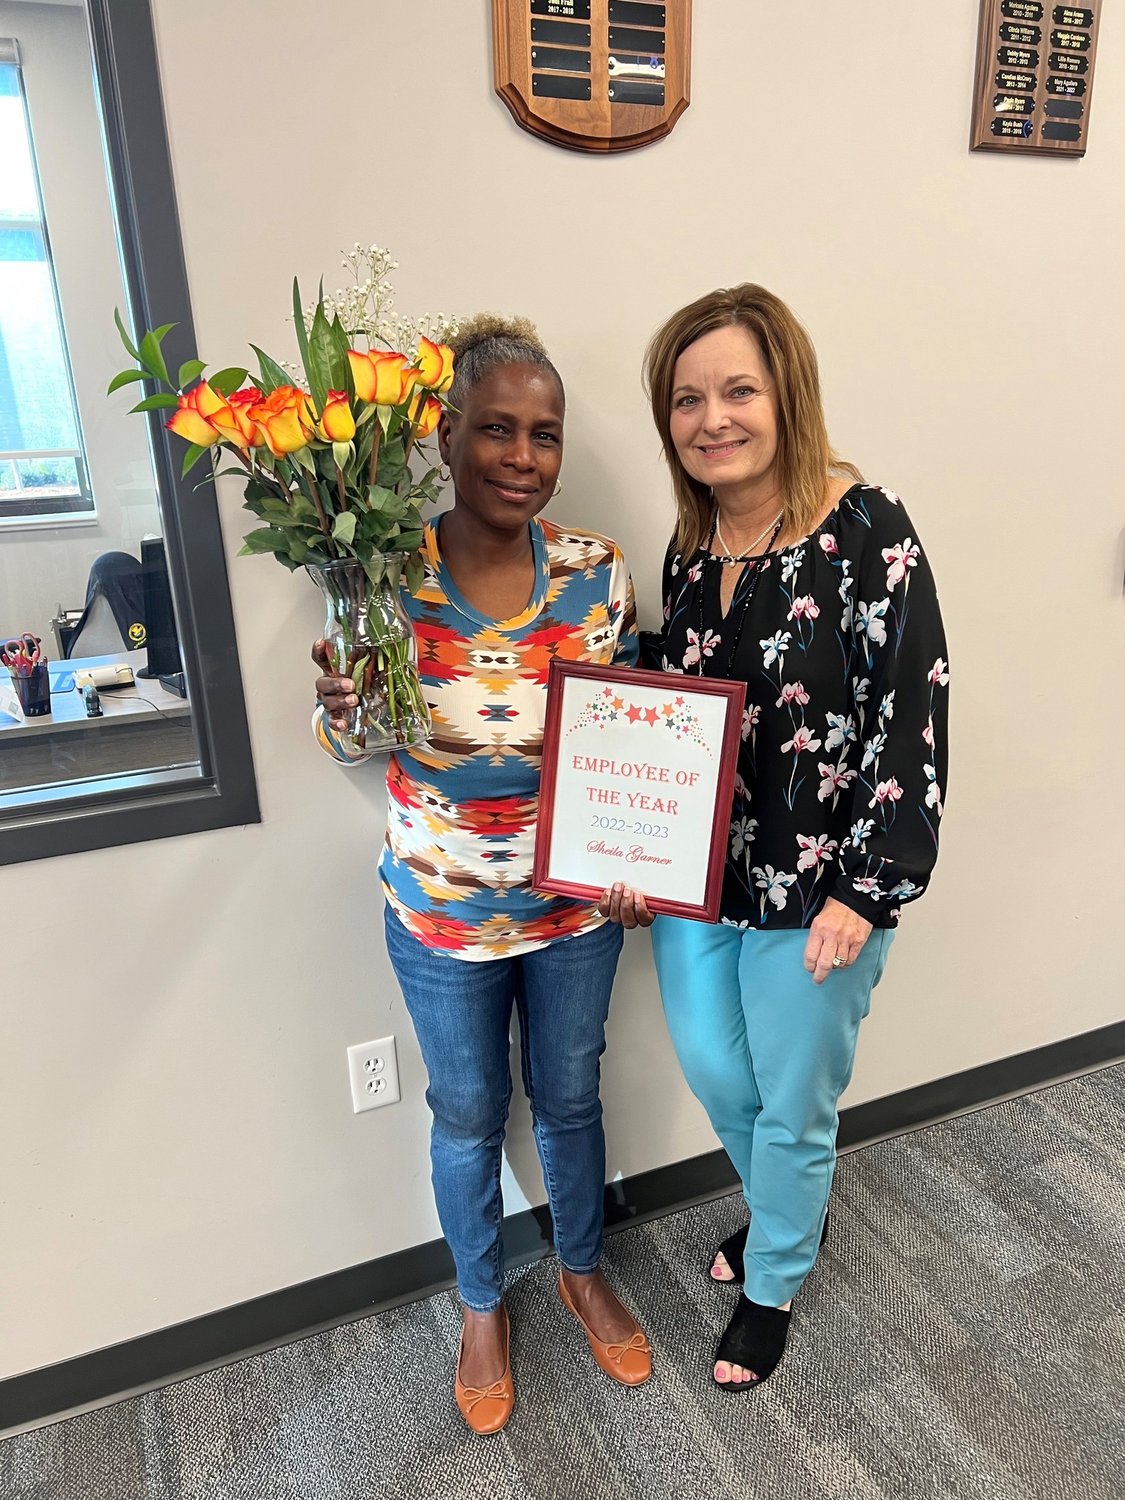 Help us Congratulate SHEILA GARNER for "Employee of the Year".
Thank you for your hard work and dedication.  Thank you for all you do.  Congratulations!